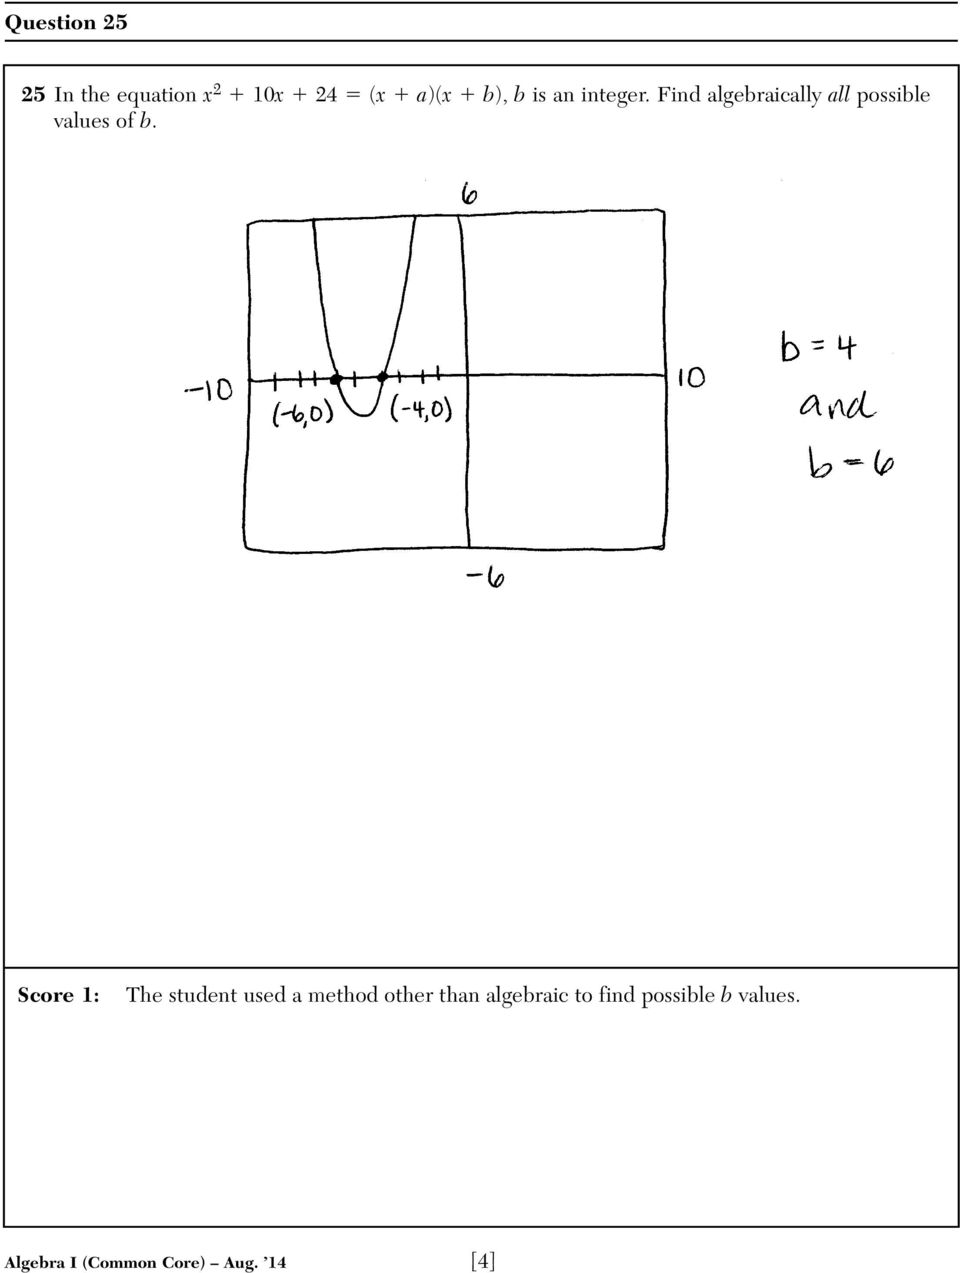 Score 1: The student used a method other than algebraic to